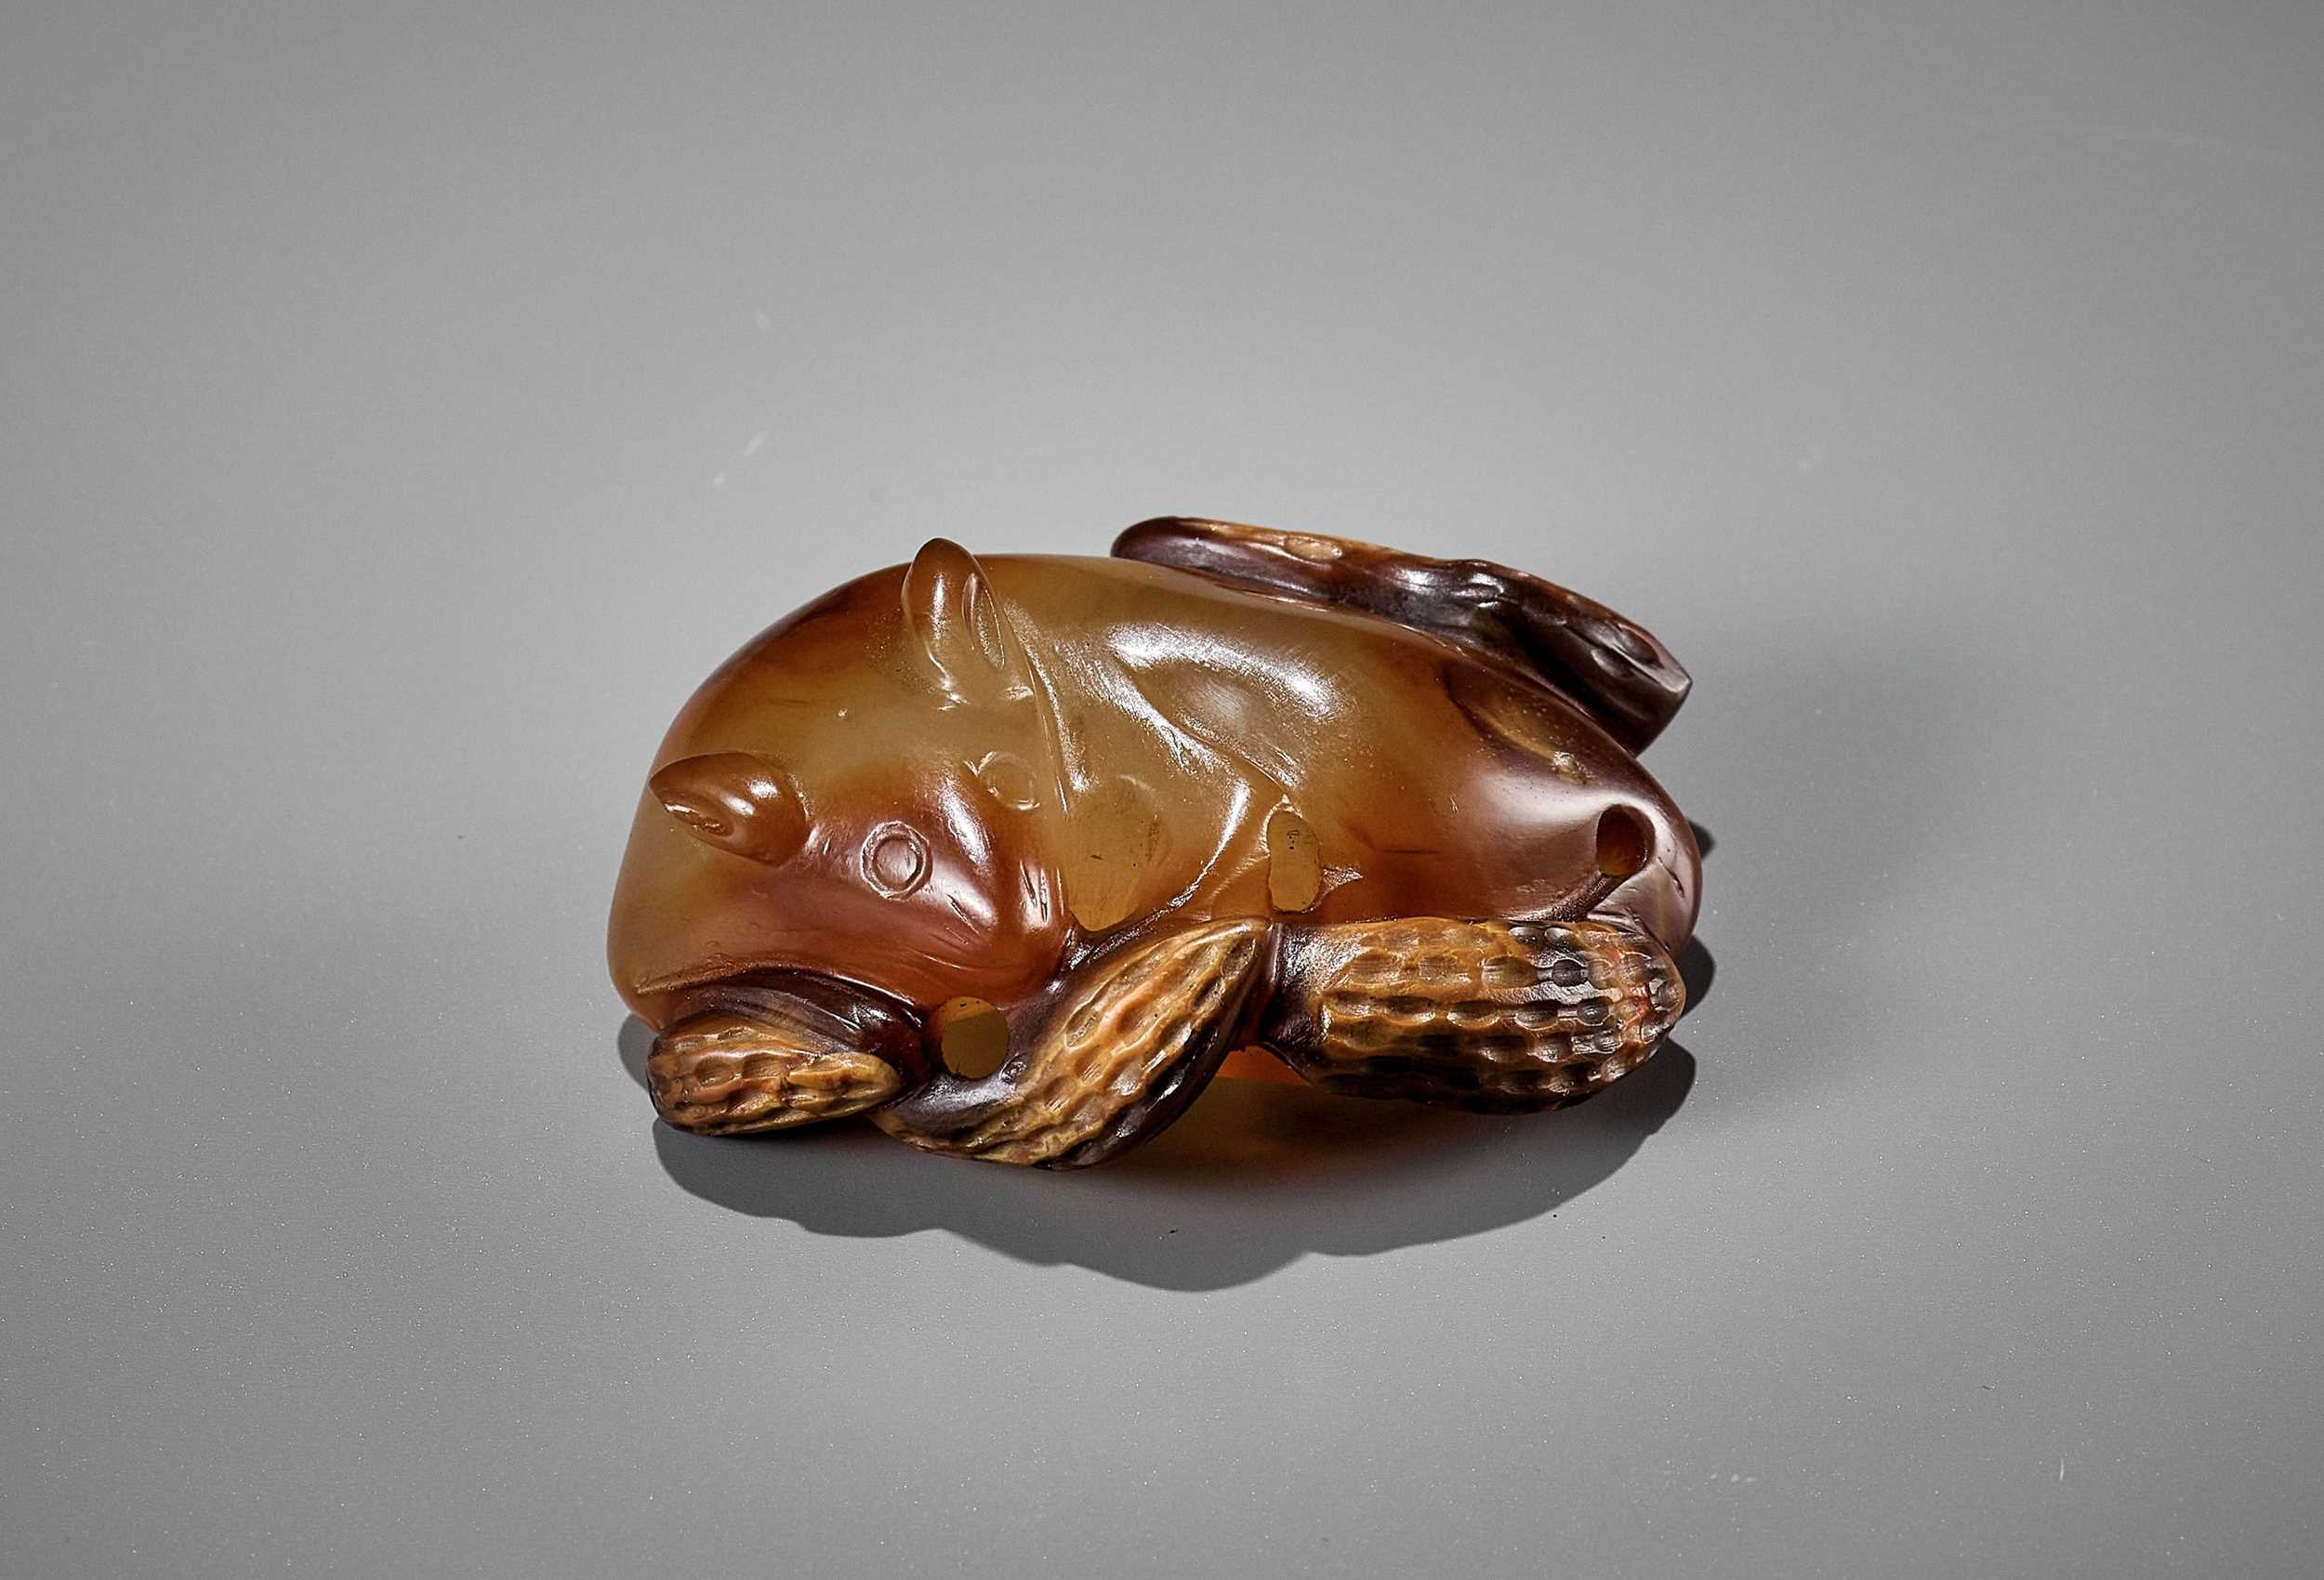 Lot 311 - AN AGATE PENDANT OF A SQUIRREL WITH PEANUTS, 18TH-19TH CENTURY